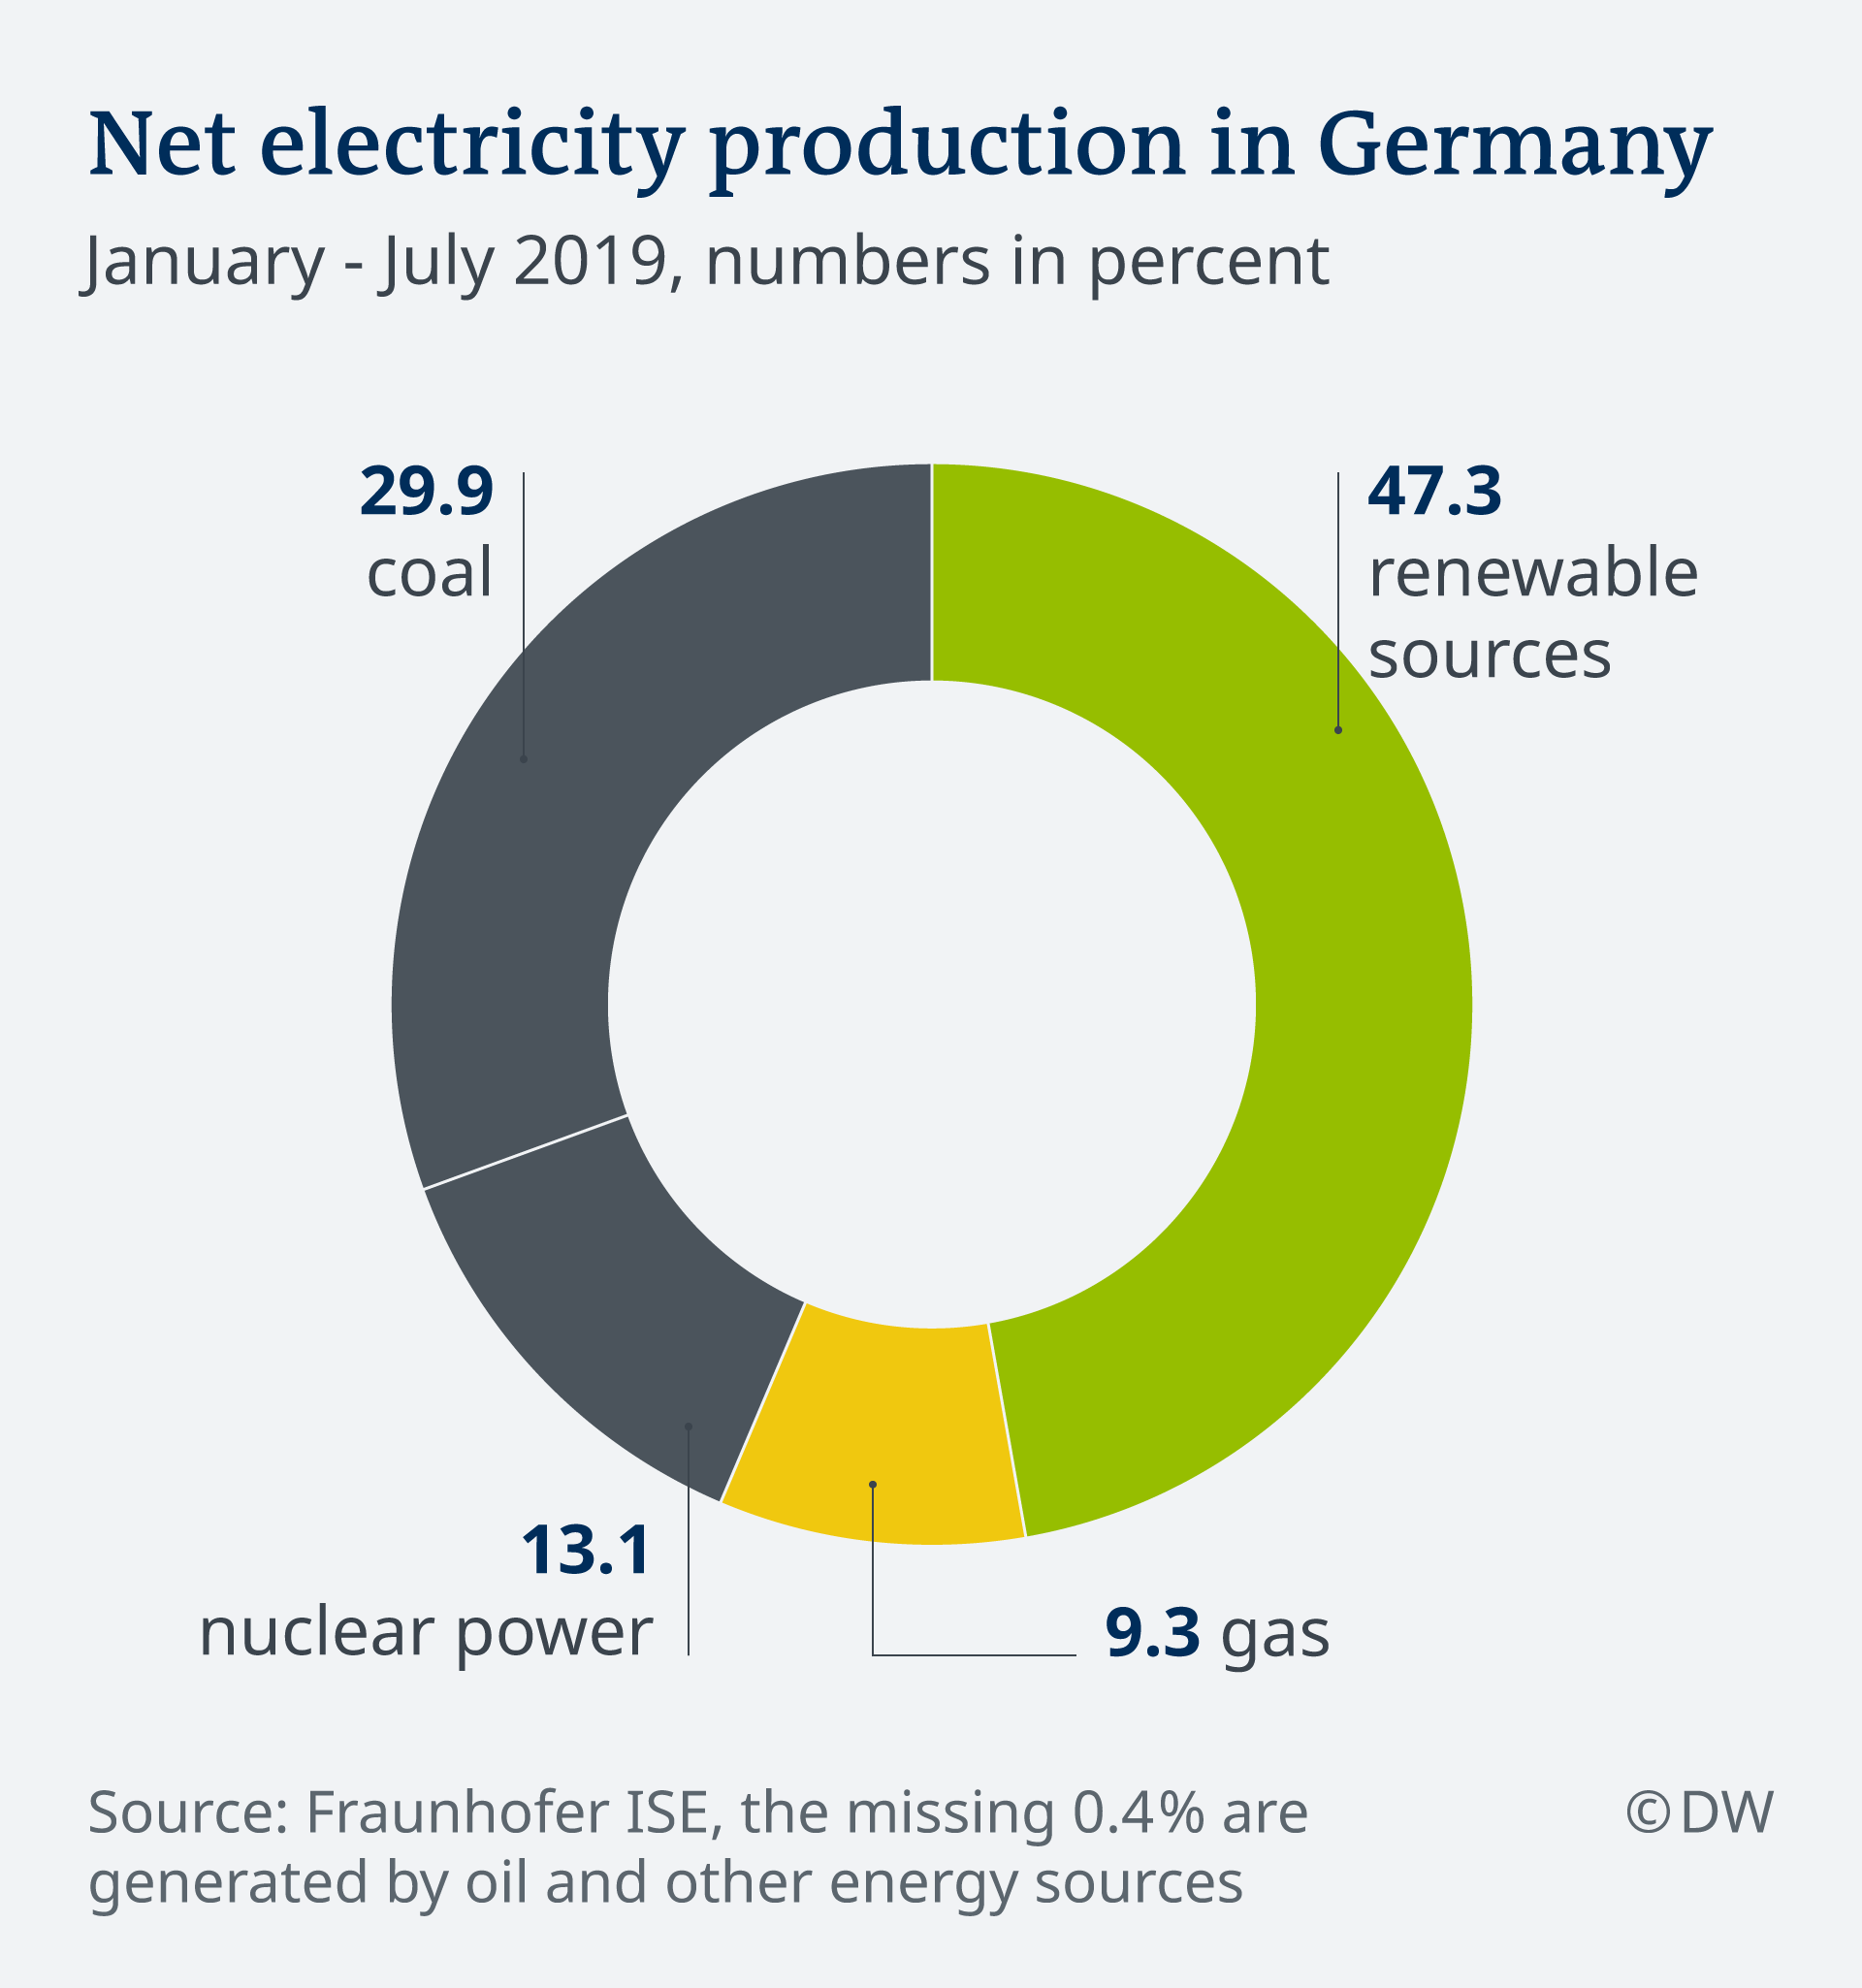 German renewables deliver more electricity than coal and nuclear power